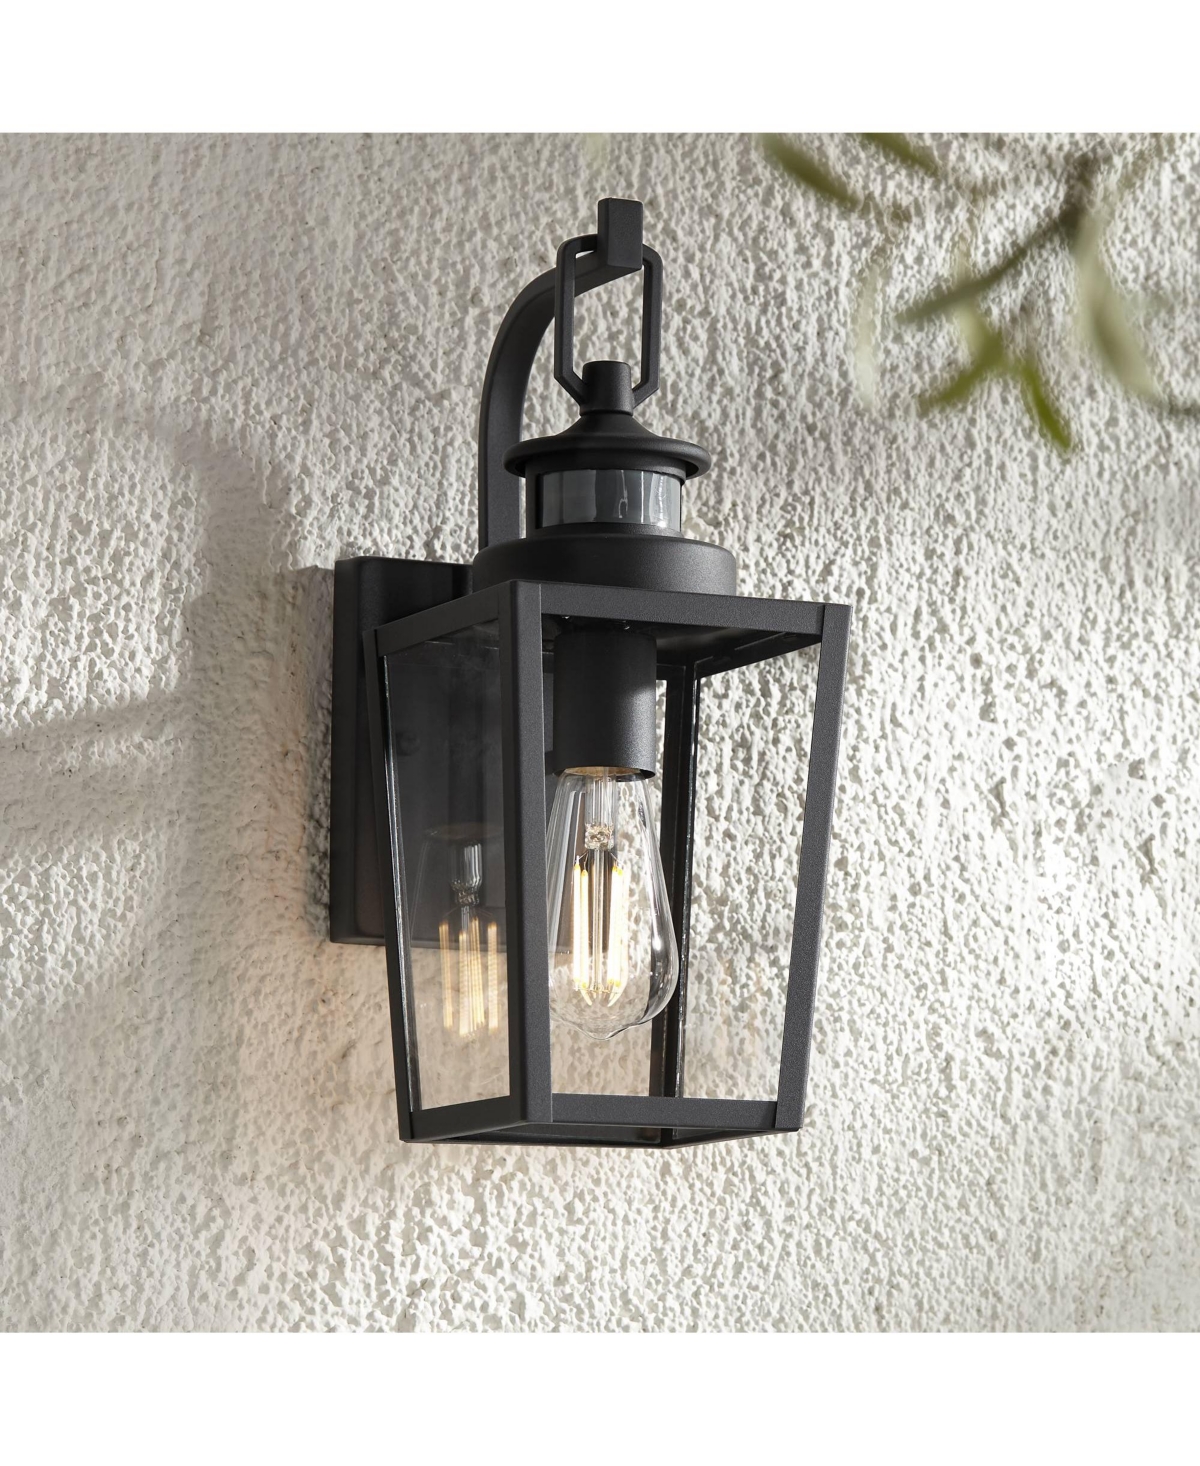 Ackerly Modern Outdoor Wall Light Fixture Motion Sensor Textured Black Dusk to Dawn 14" Clear Glass for Exterior Barn Deck House Porch Yard Patio Outs